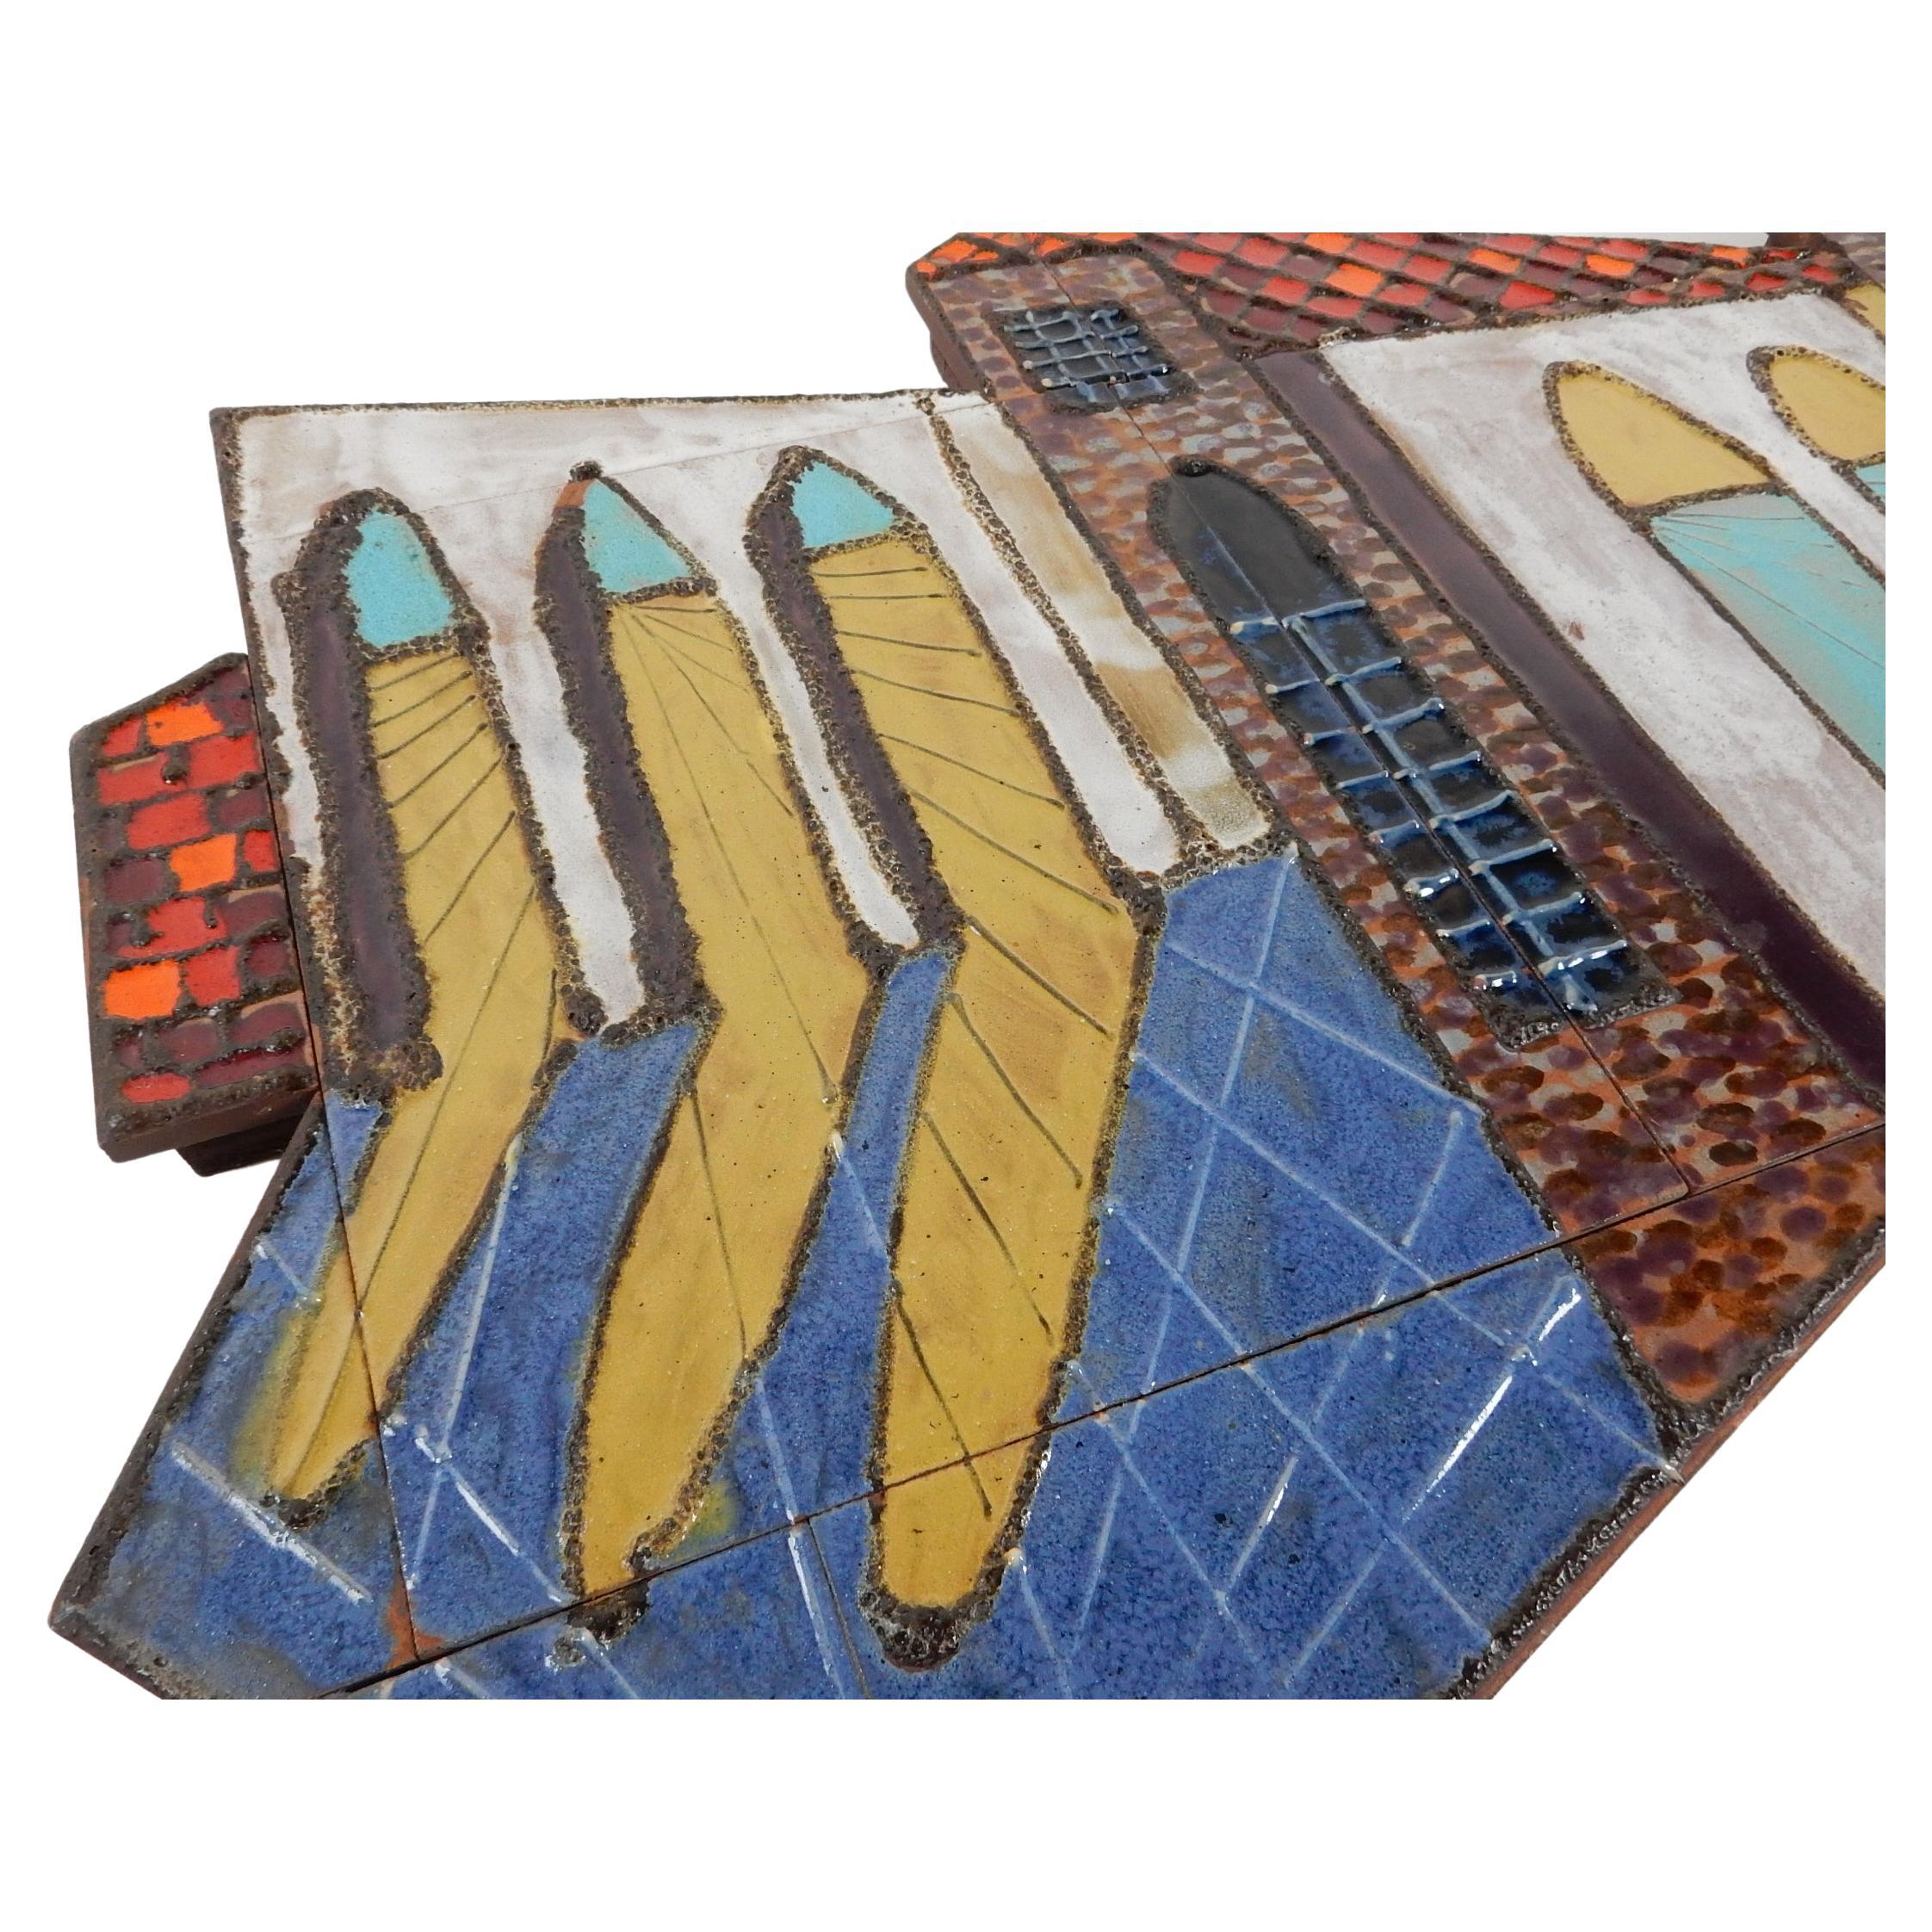 Mid-Century Modern 1970s California Mission Architectural Ceramic Tile Wall Art Sculpture For Sale